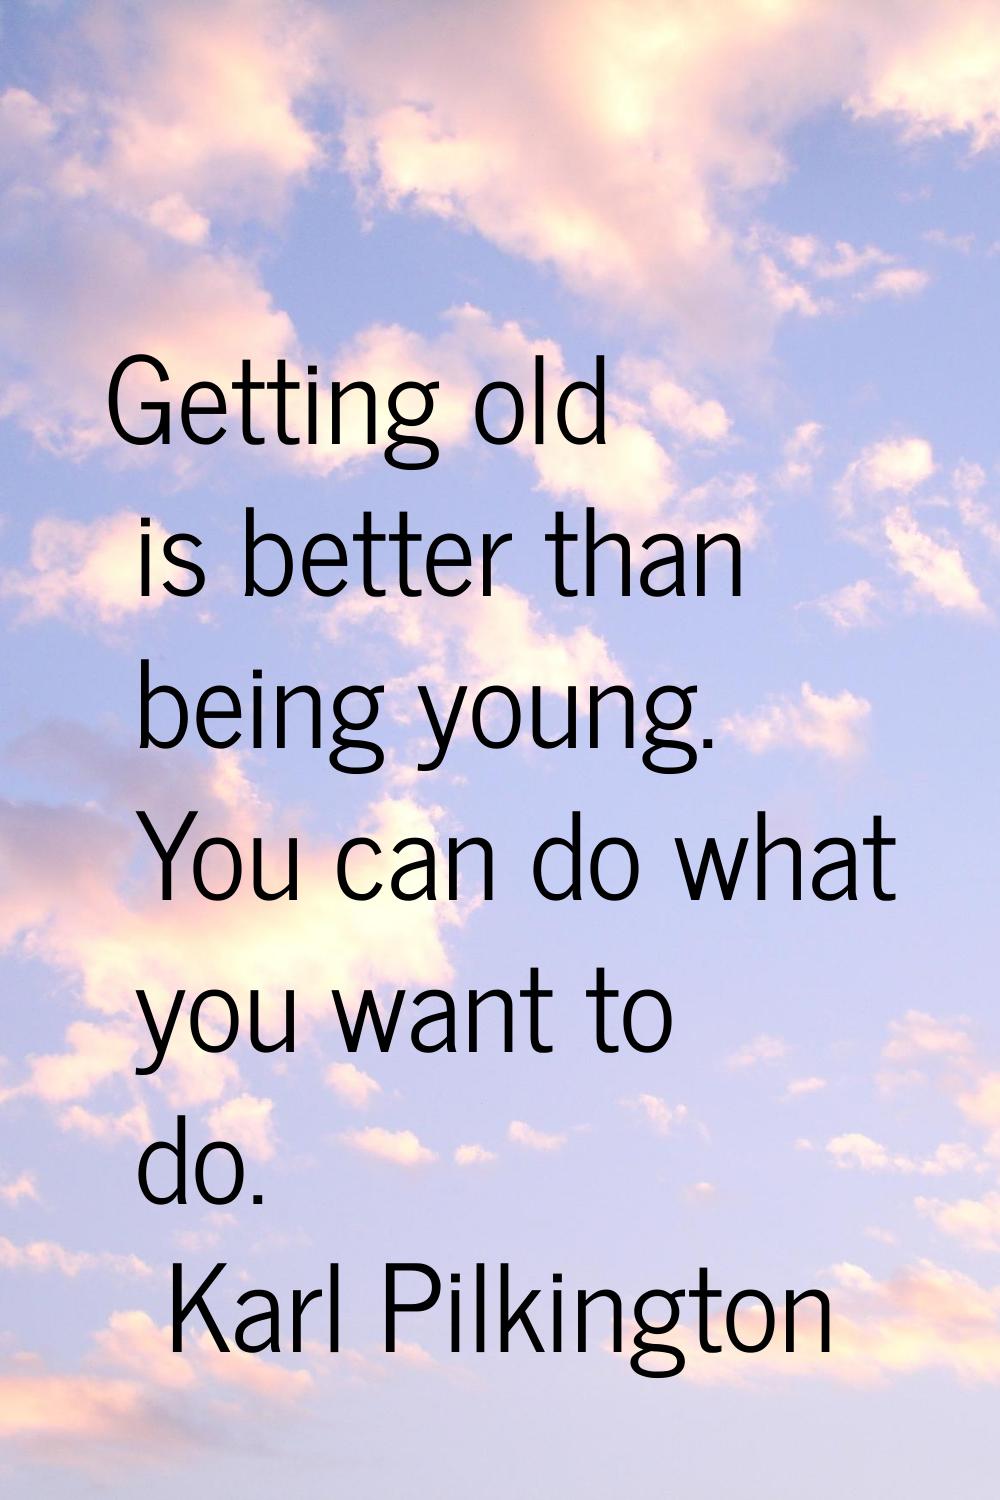 Getting old is better than being young. You can do what you want to do.